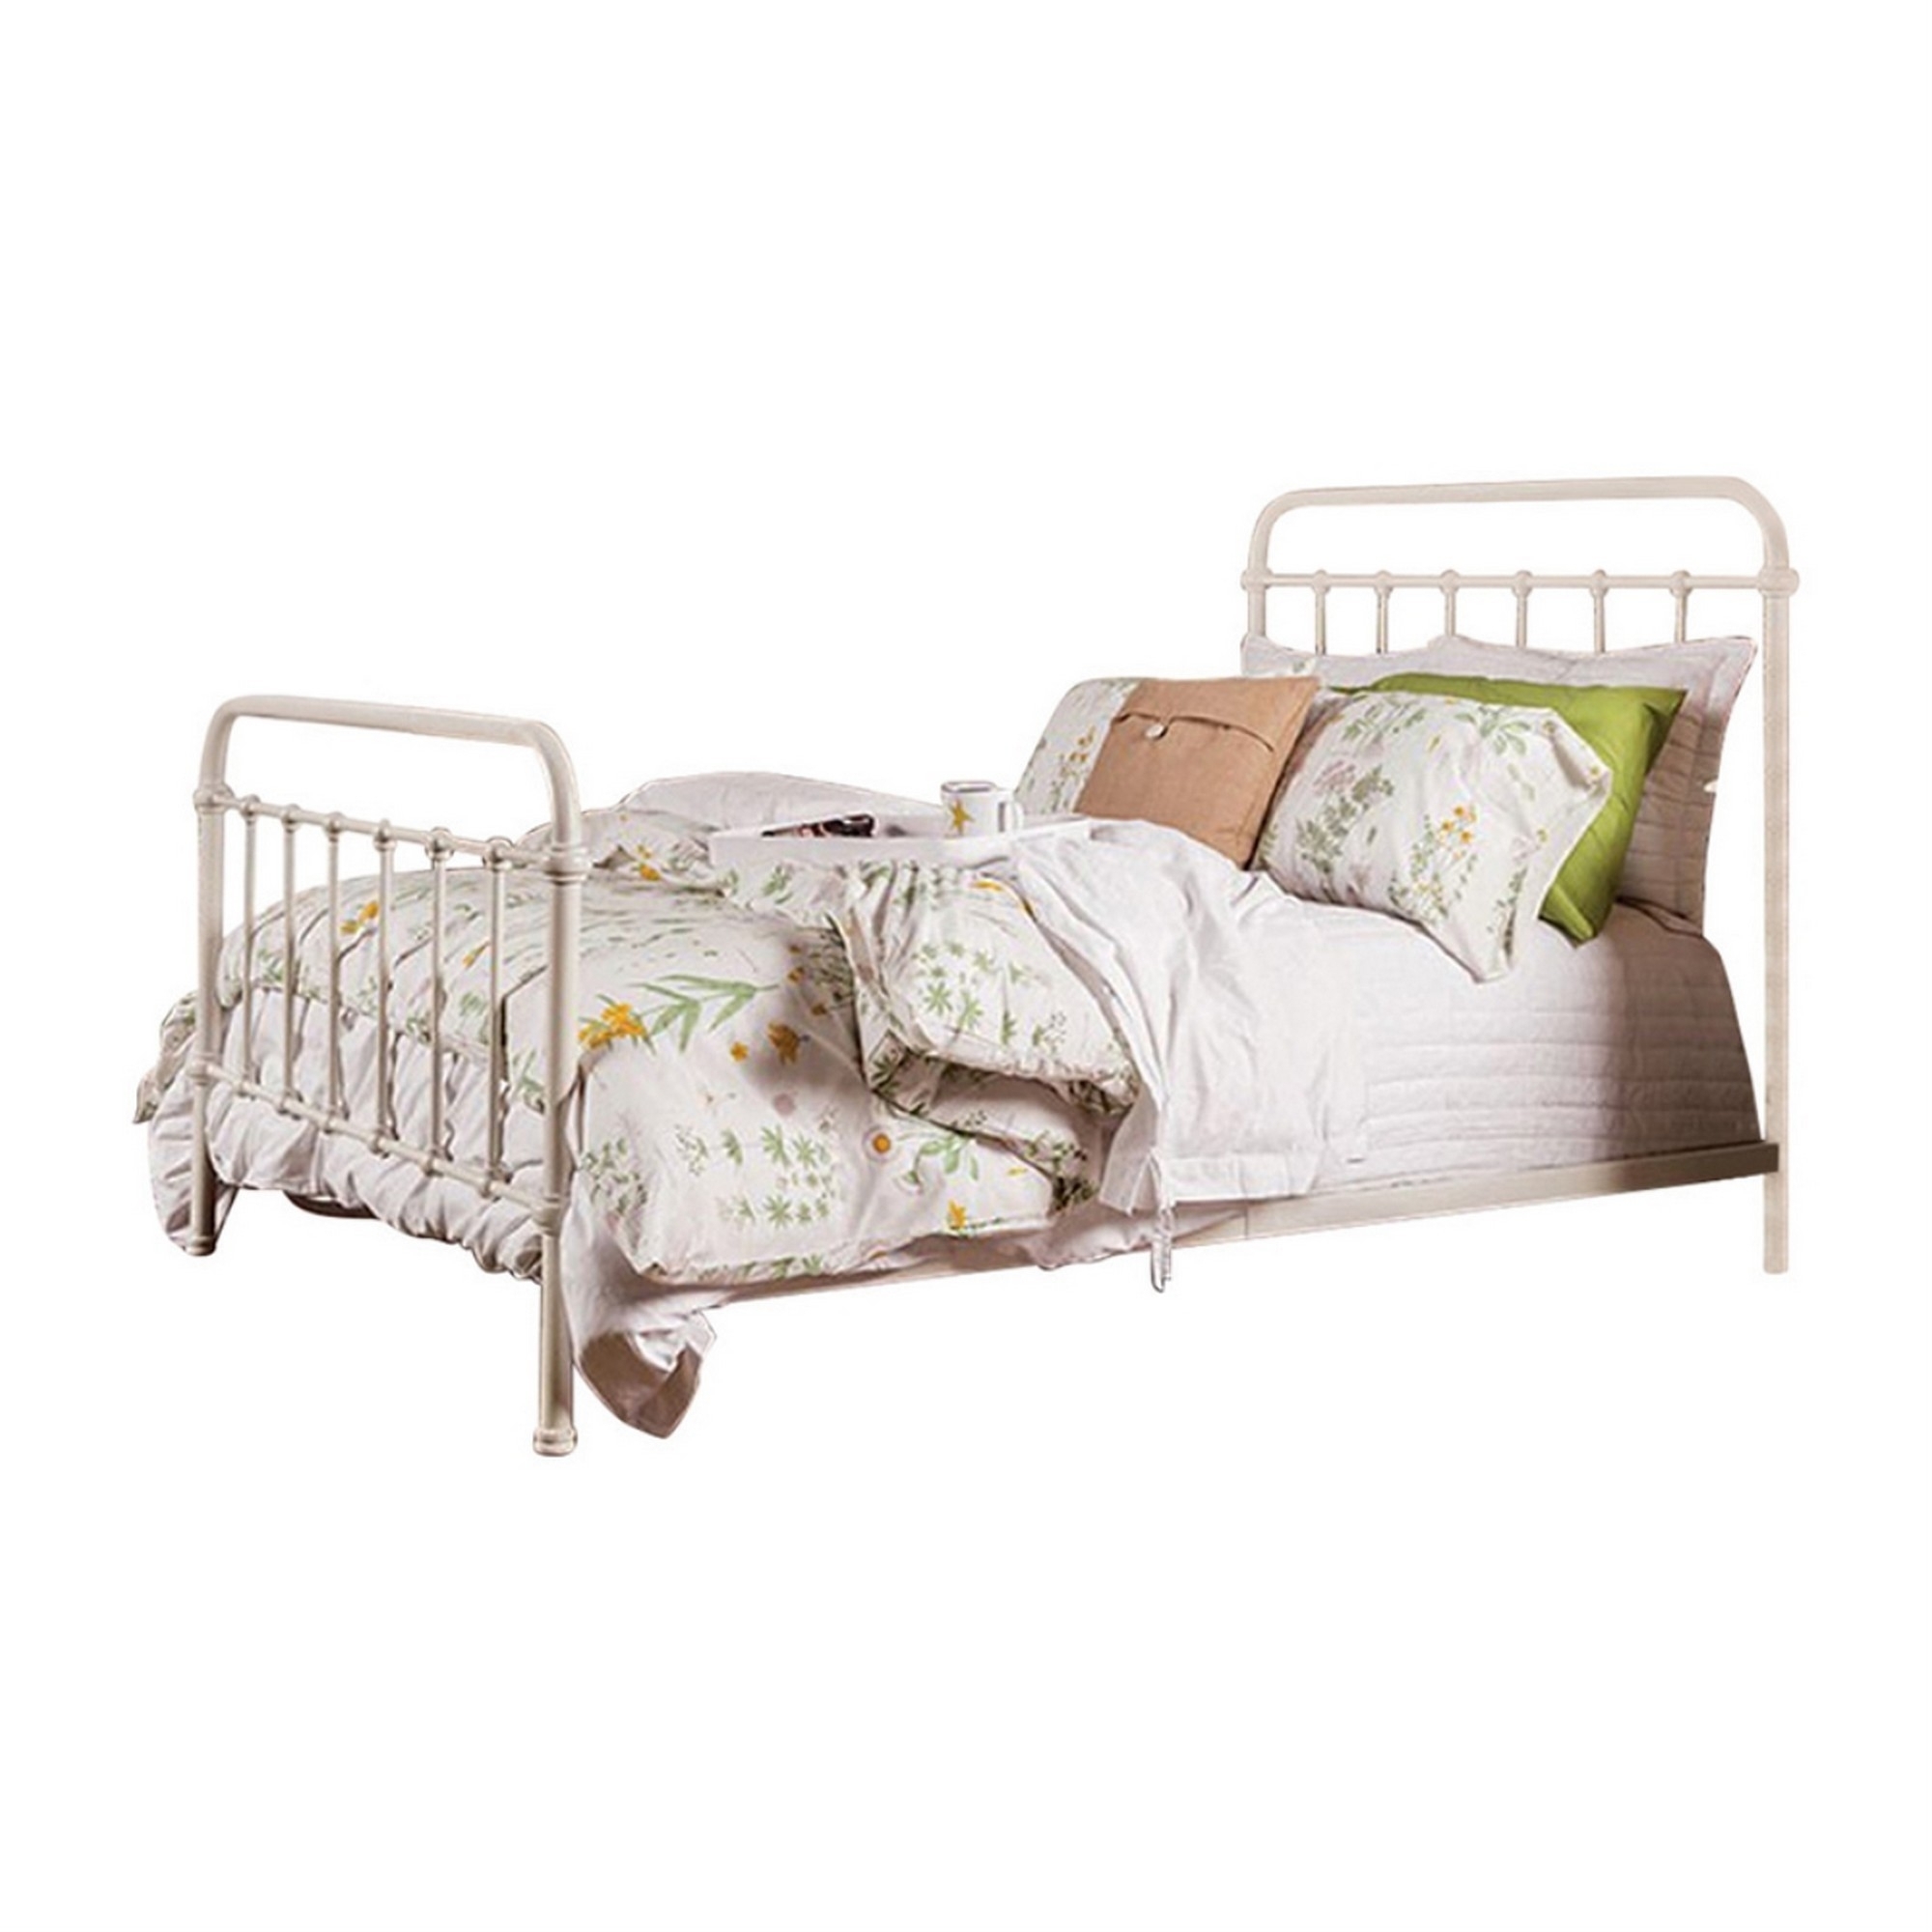 Industrial Style Metal Frame Twin Size Bed With Spindle Design, Antique White- Saltoro Sherpi